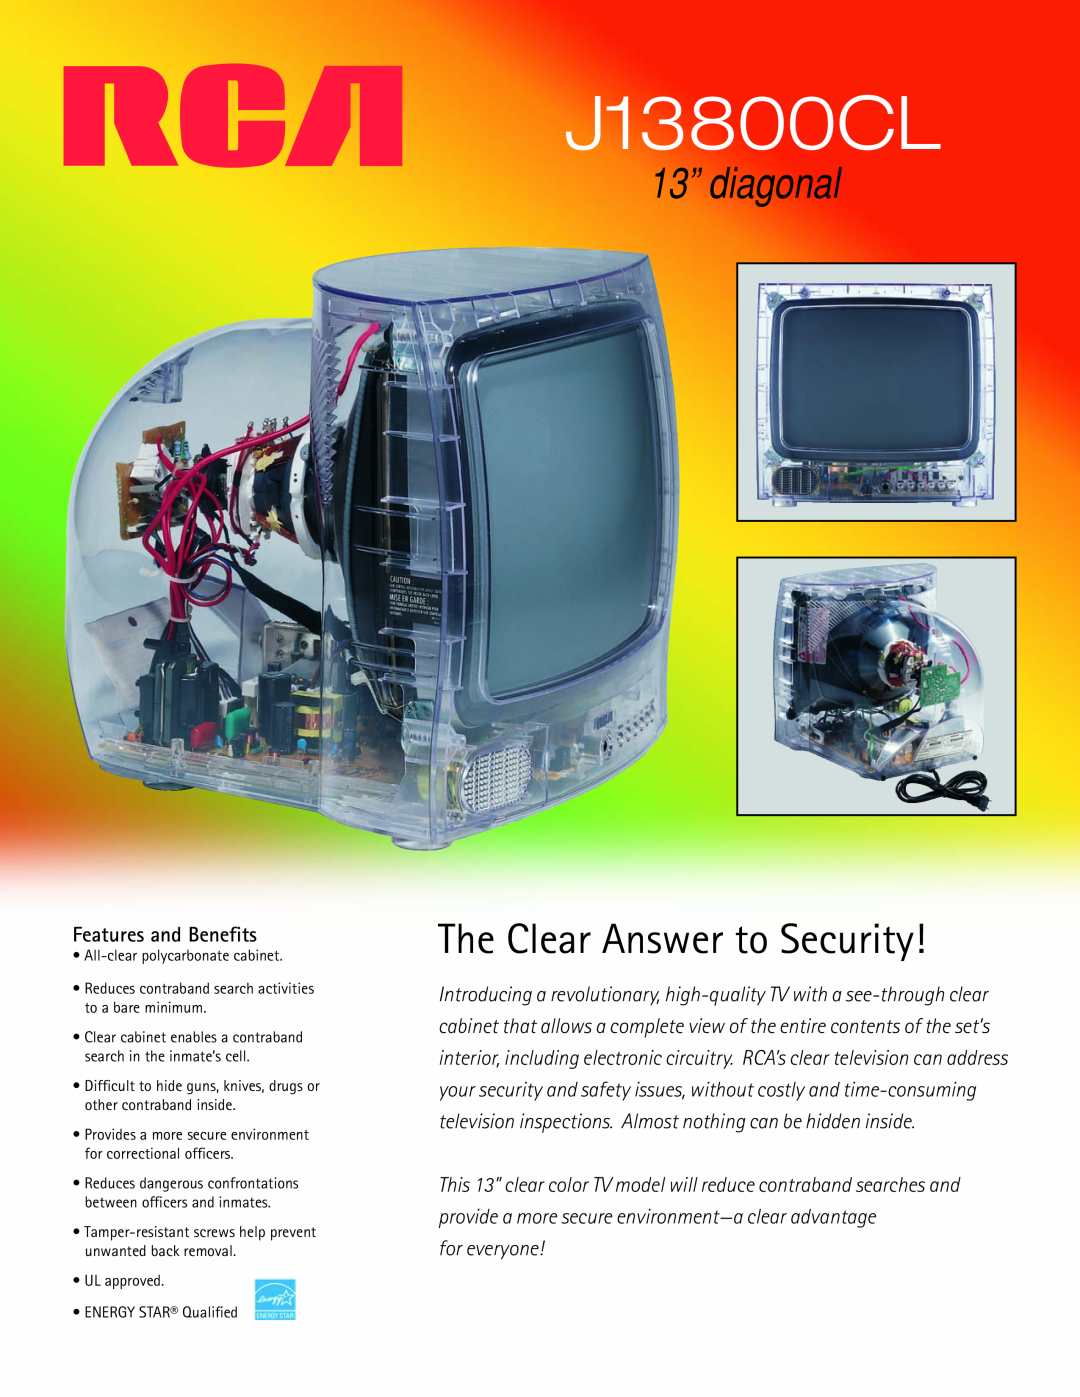 RCA J13800CL warranty 13” diagonal, The Clear Answer to Security, Features and Benefits, Limited Warranty, for everyone 